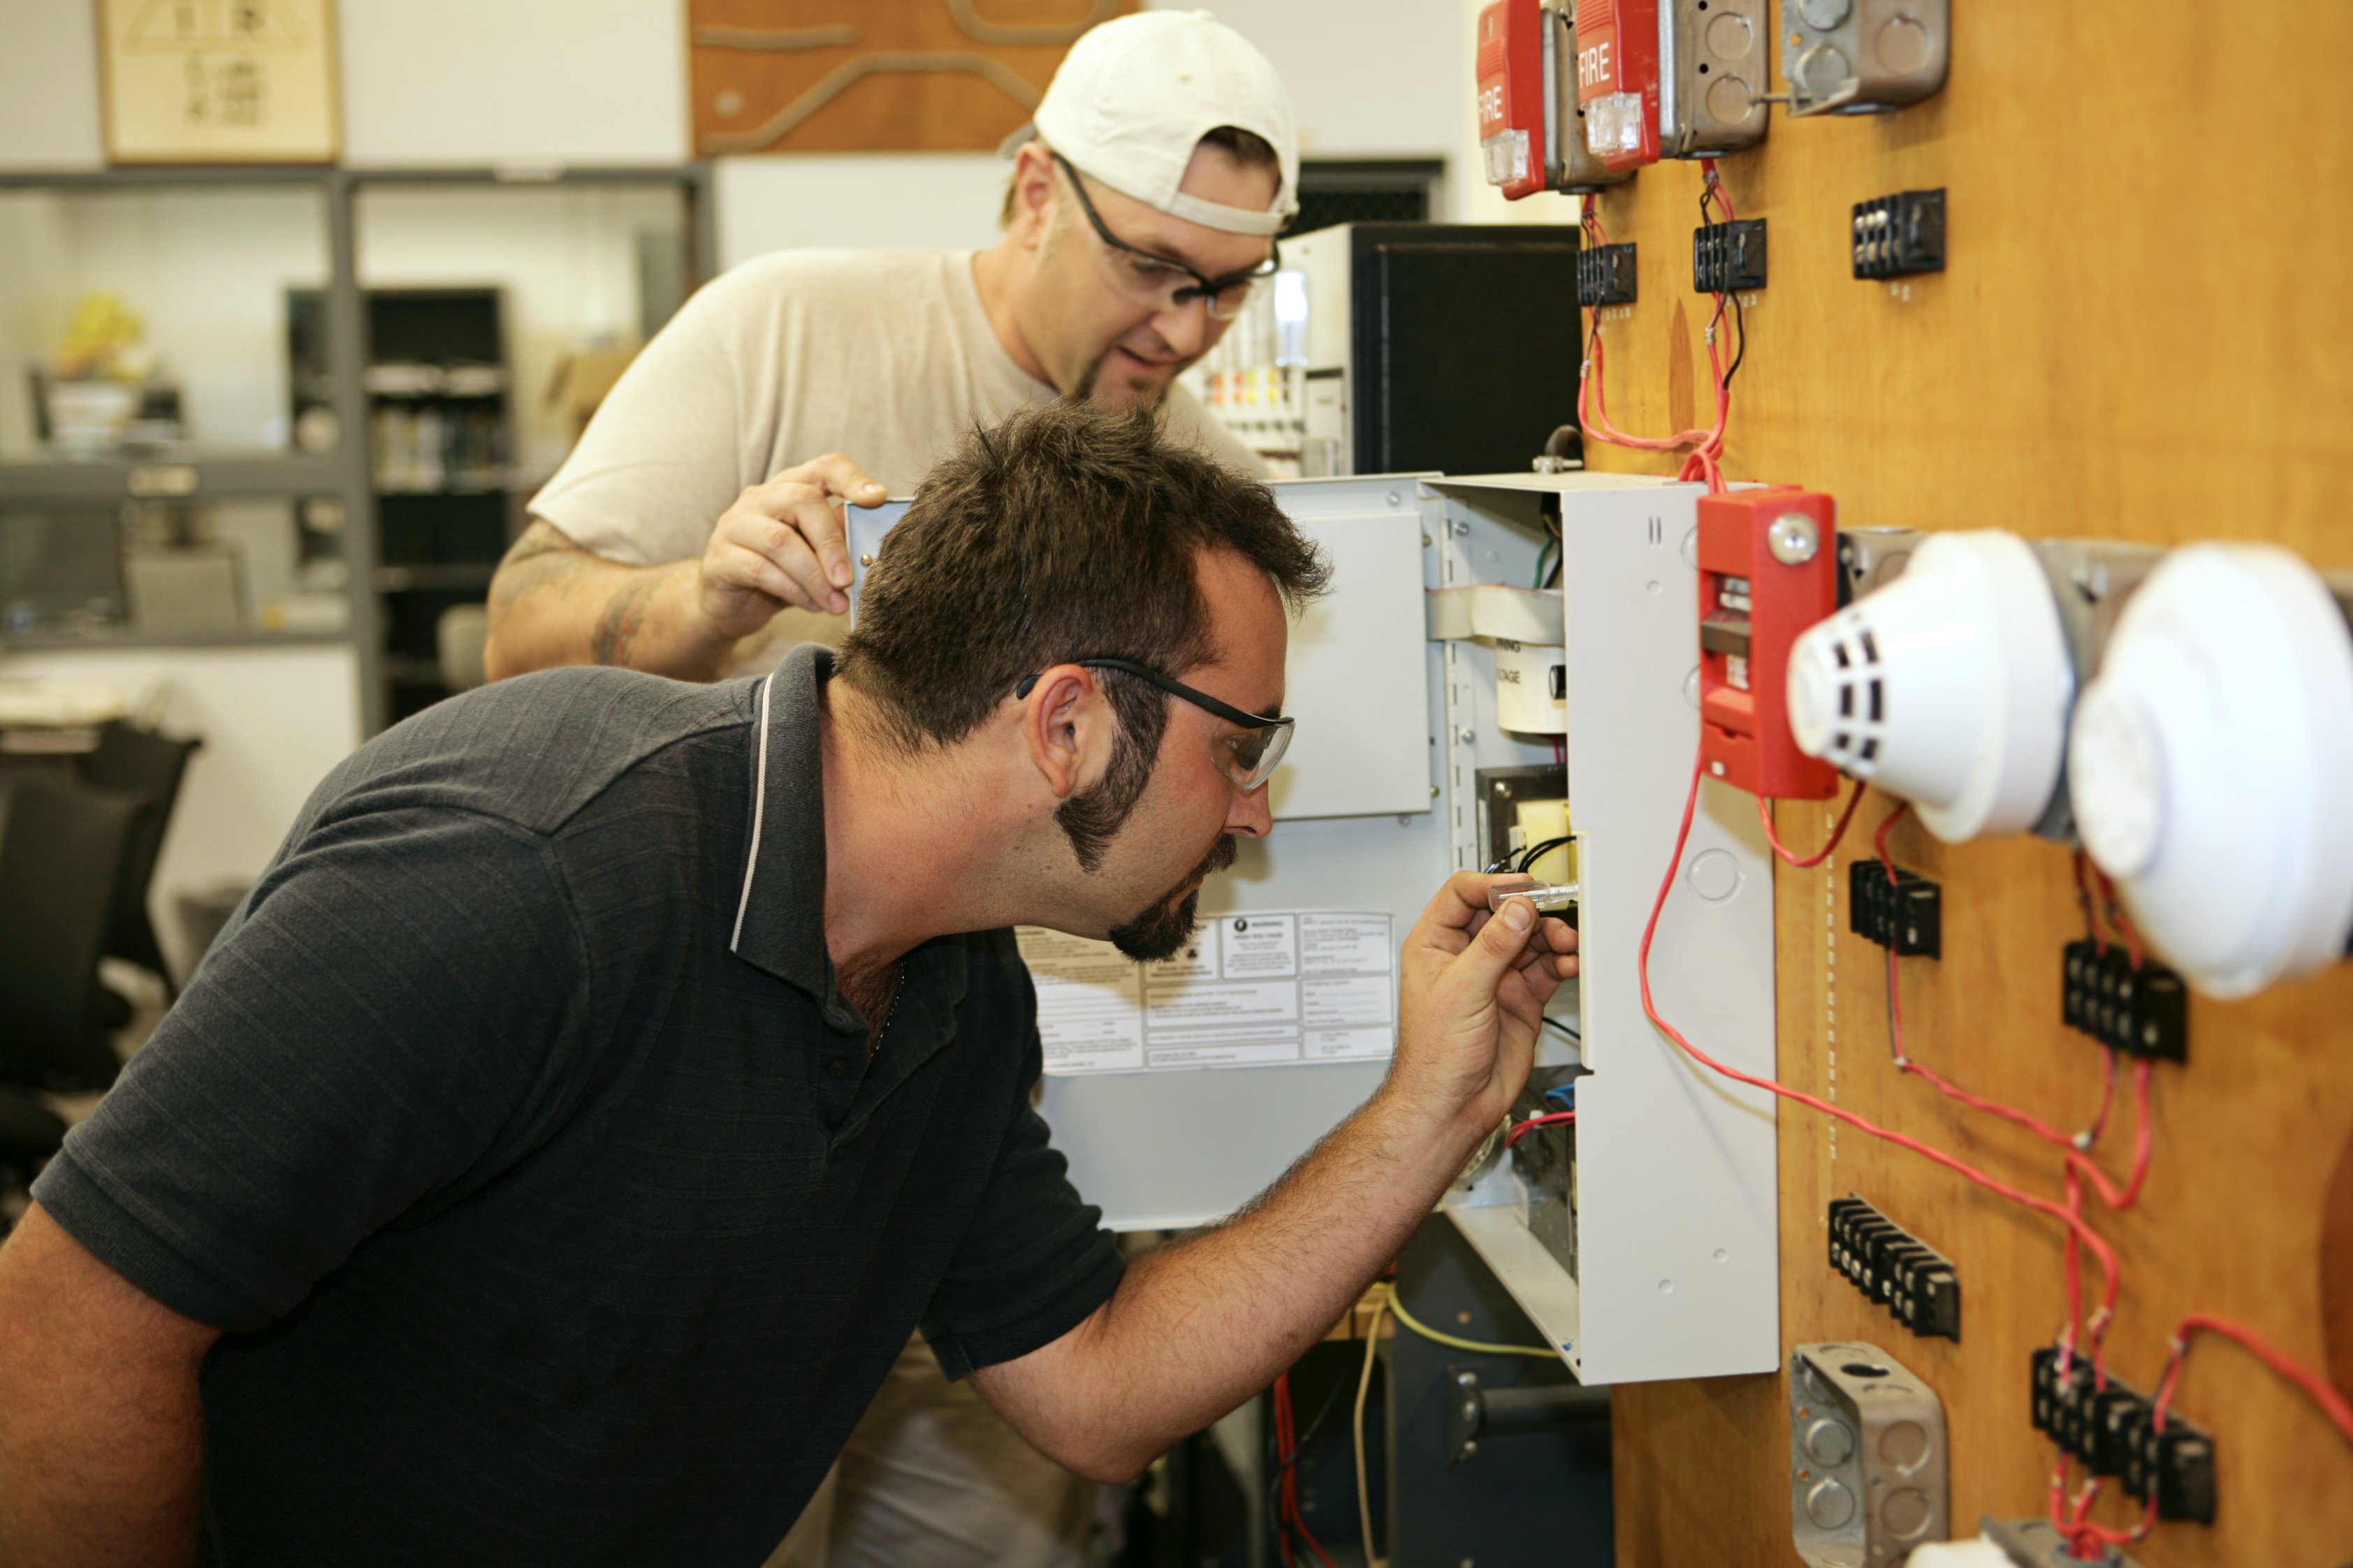 Trade school student learning how to wire a fire alarm system